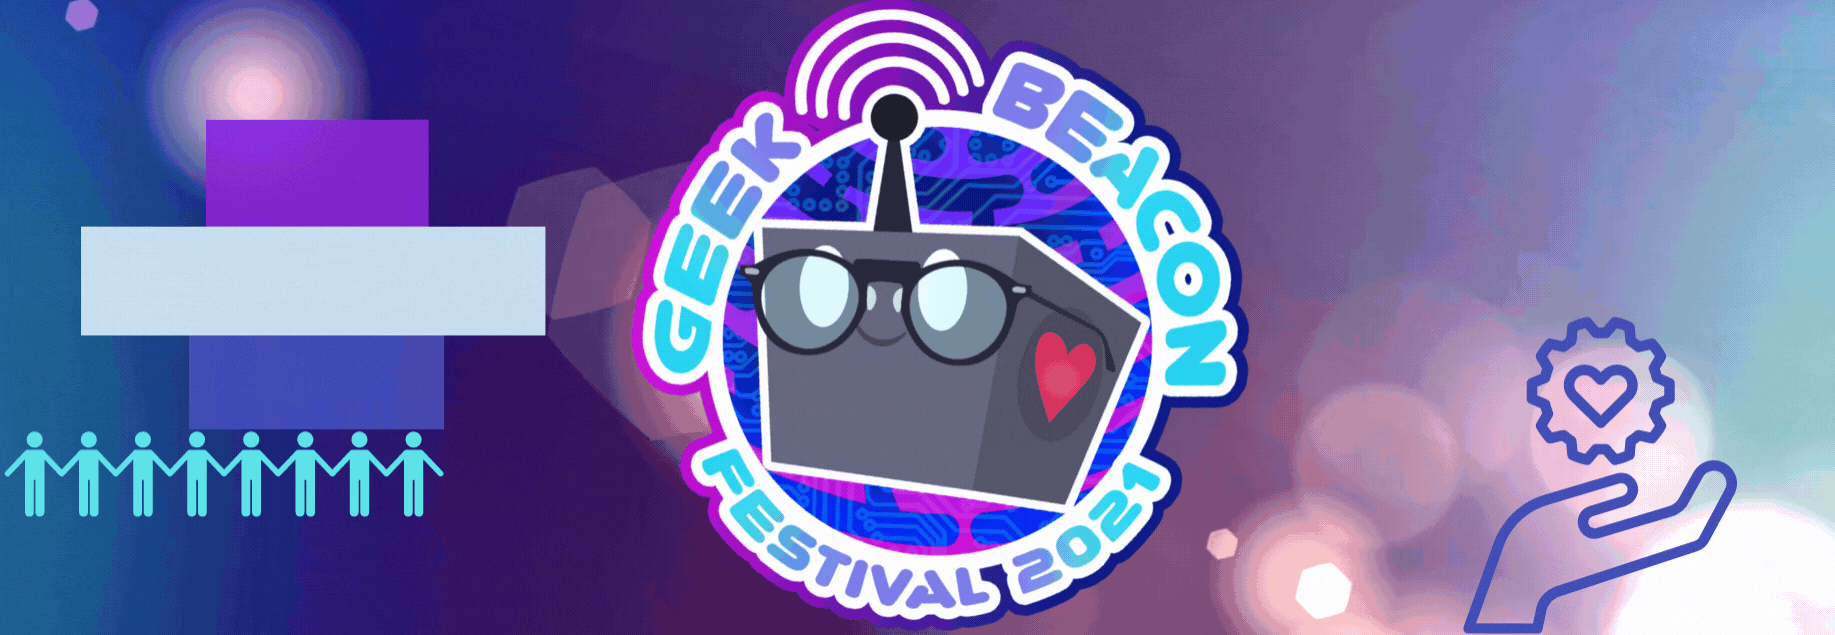 Important Update - GBFest Expands; More Speakers, New Dates!